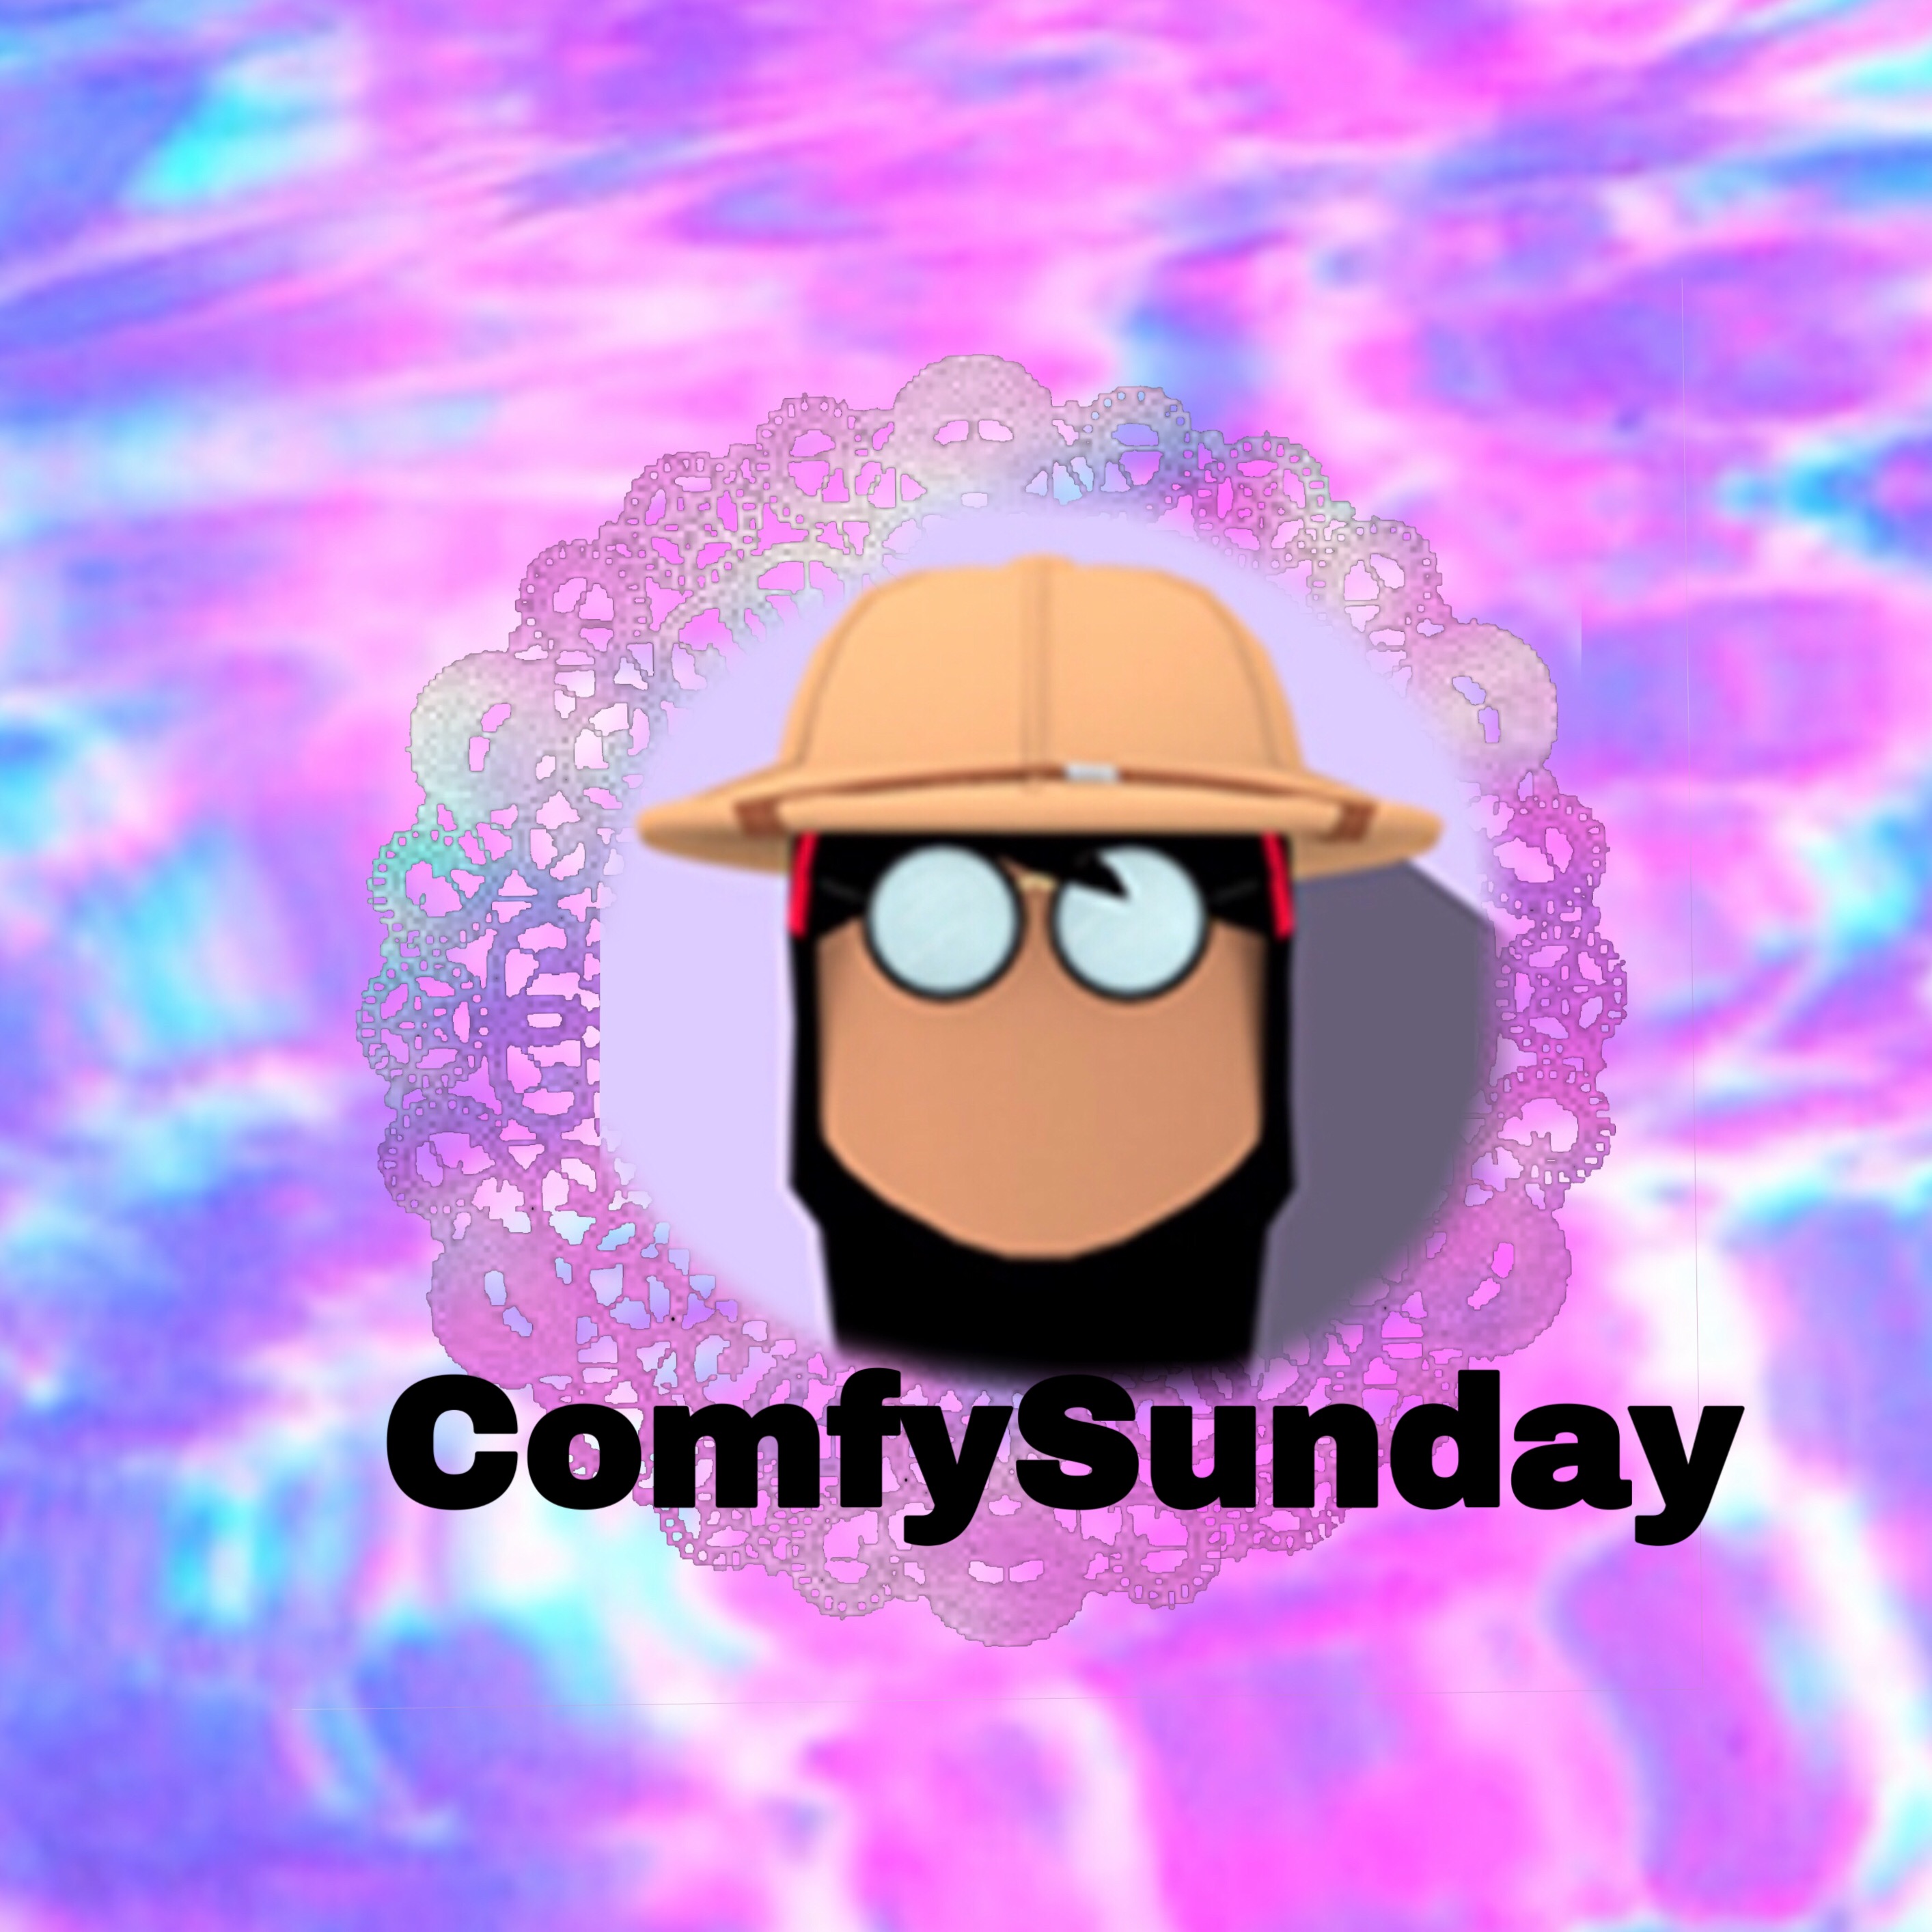 Roblox Comfysunday Image By - roblox comfysunday image by